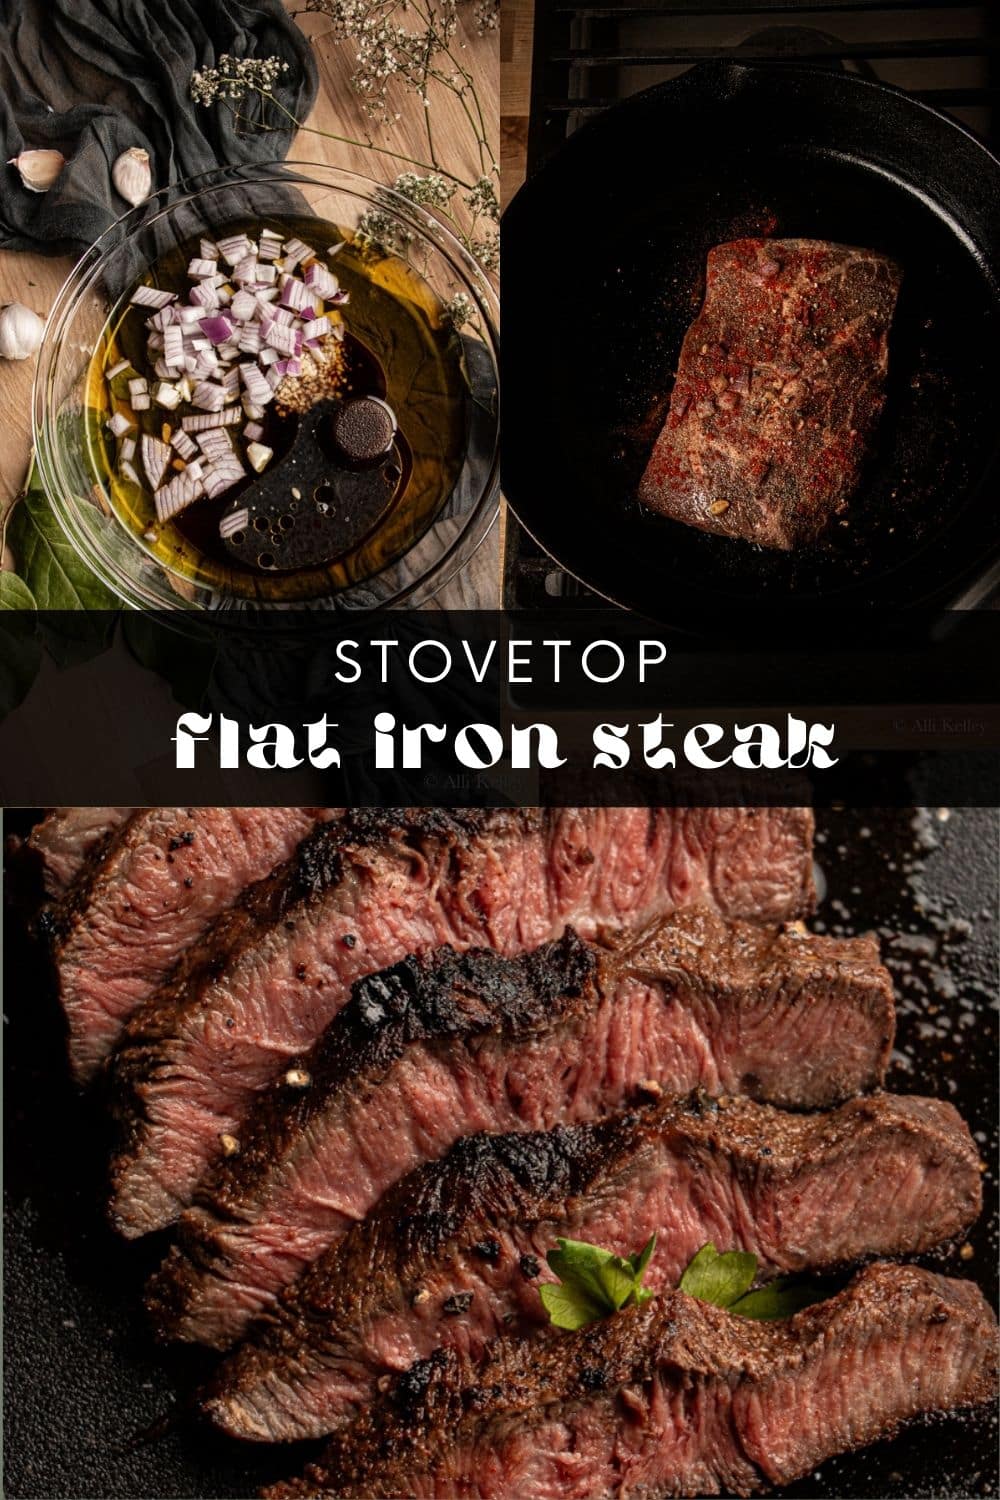 Flat iron steak is one of the most underrated yet delicious cuts of beef. Juicy, tender, and packed full of flavor, it's a real treat! My flat iron steak recipe takes this cut of meat to the next level with a simple marinade that adds even more flavor. Plus, once you know how to cook flat iron steak - you can have restaurant-worthy steak at home whenever you want!